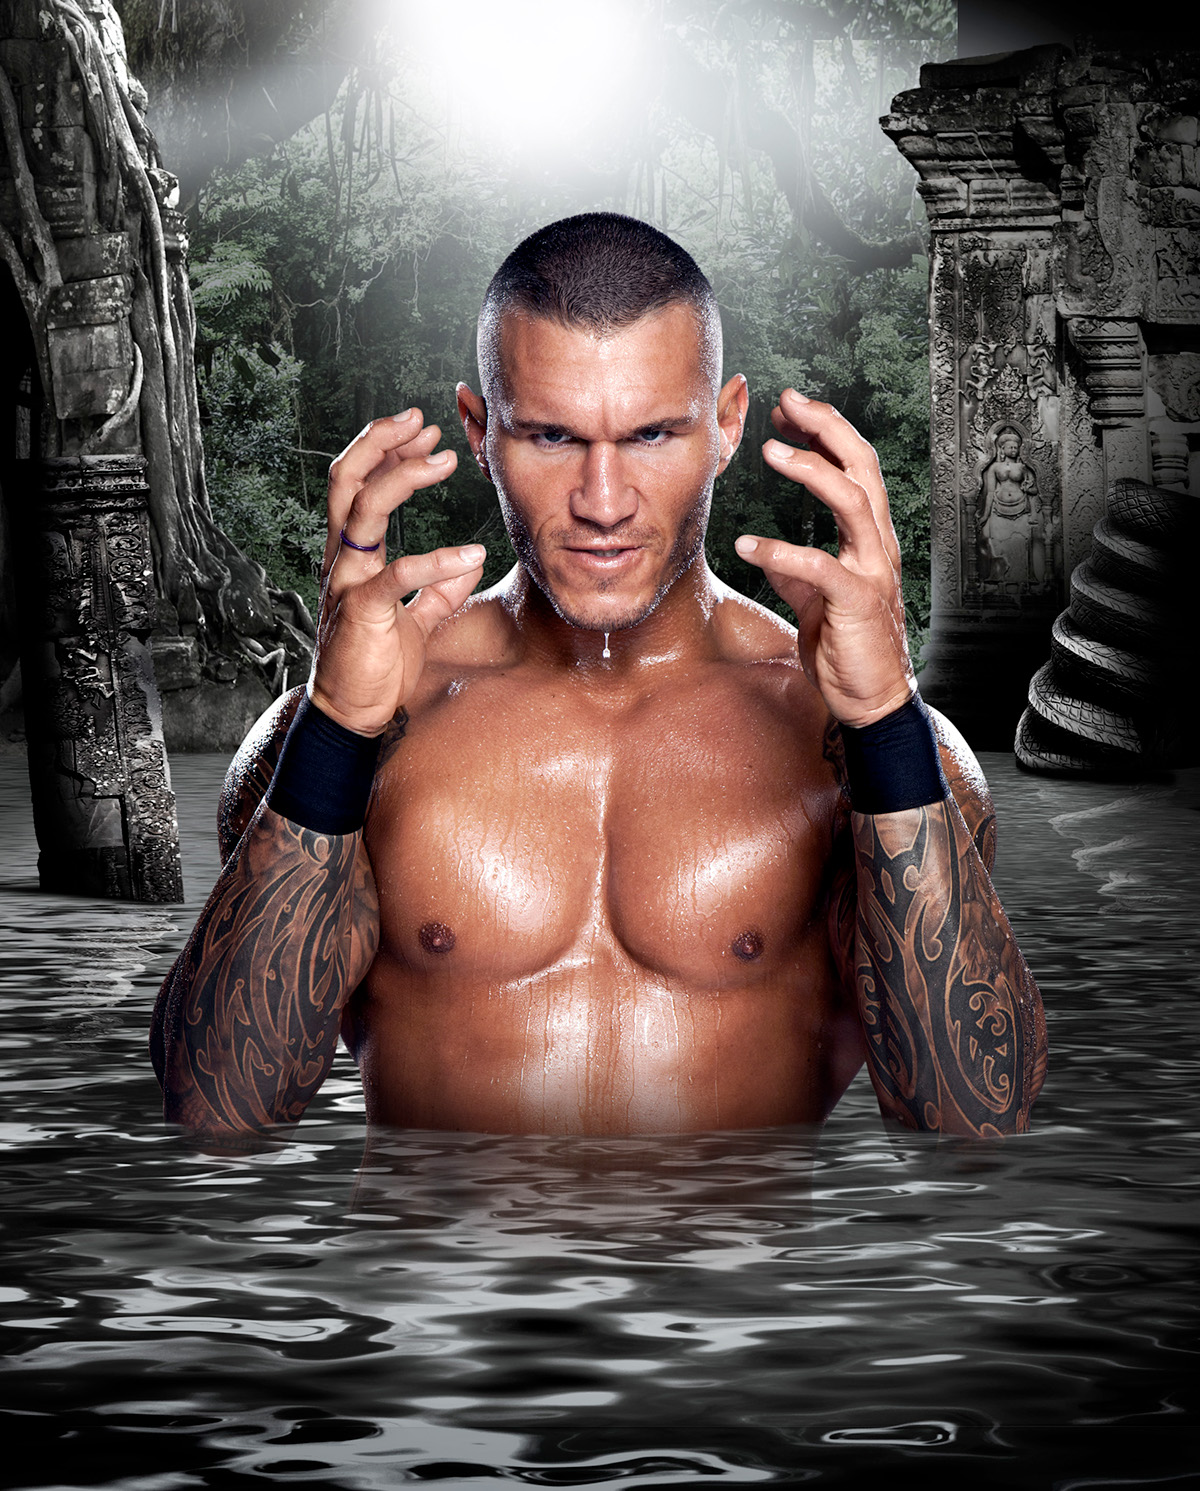 WWE randy orton water splash swamp temple Composite jungle movement publishing   Wrestling mysterious Moody Theatrical